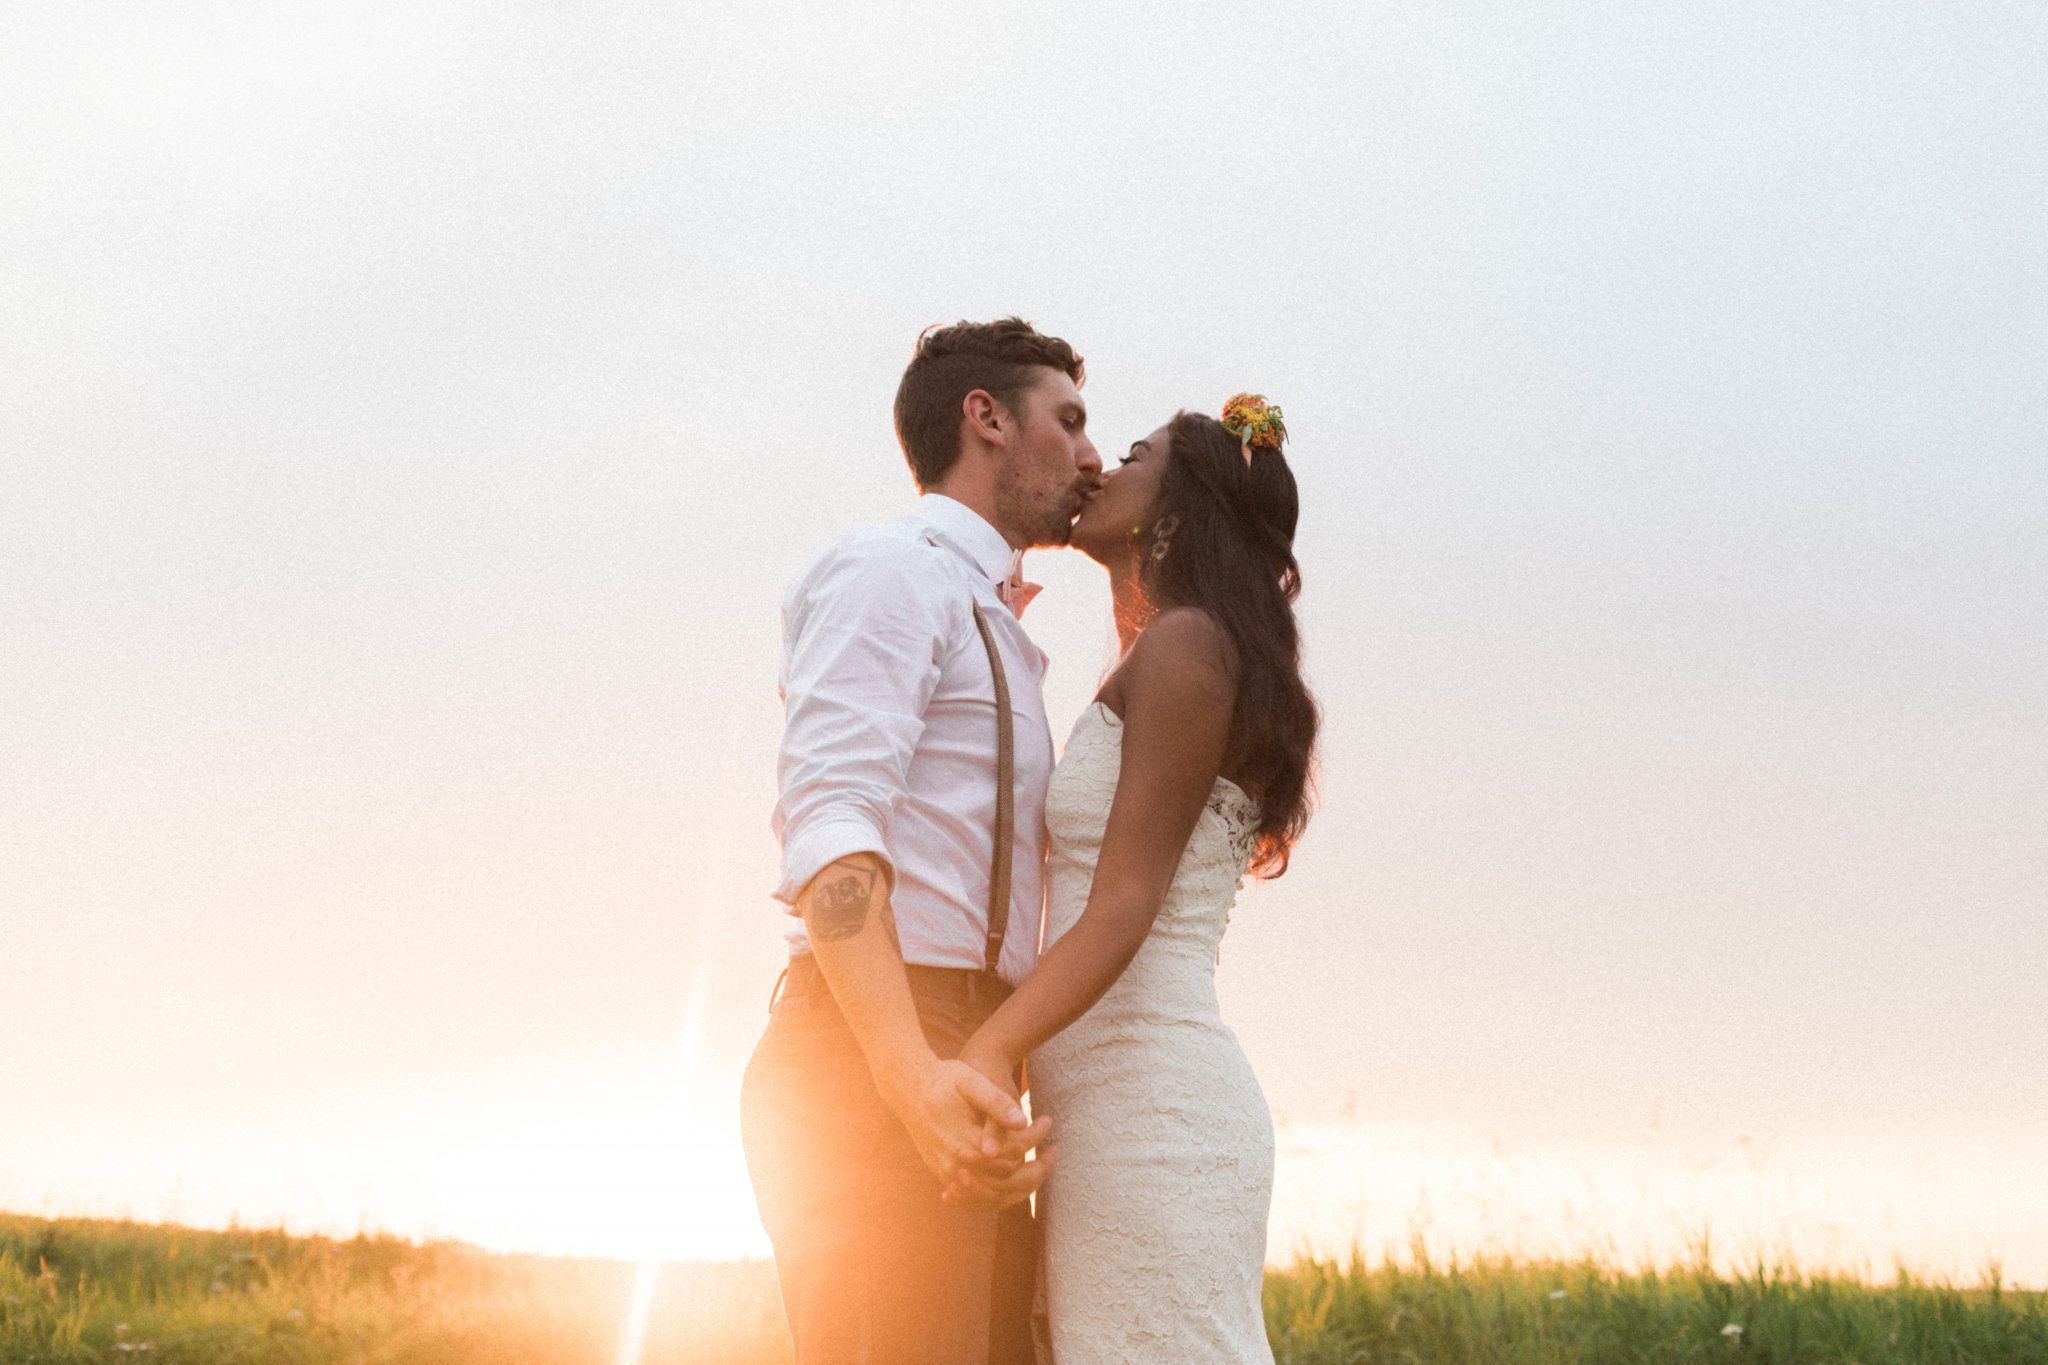 Sunset garden inspired wedding at The Gathered